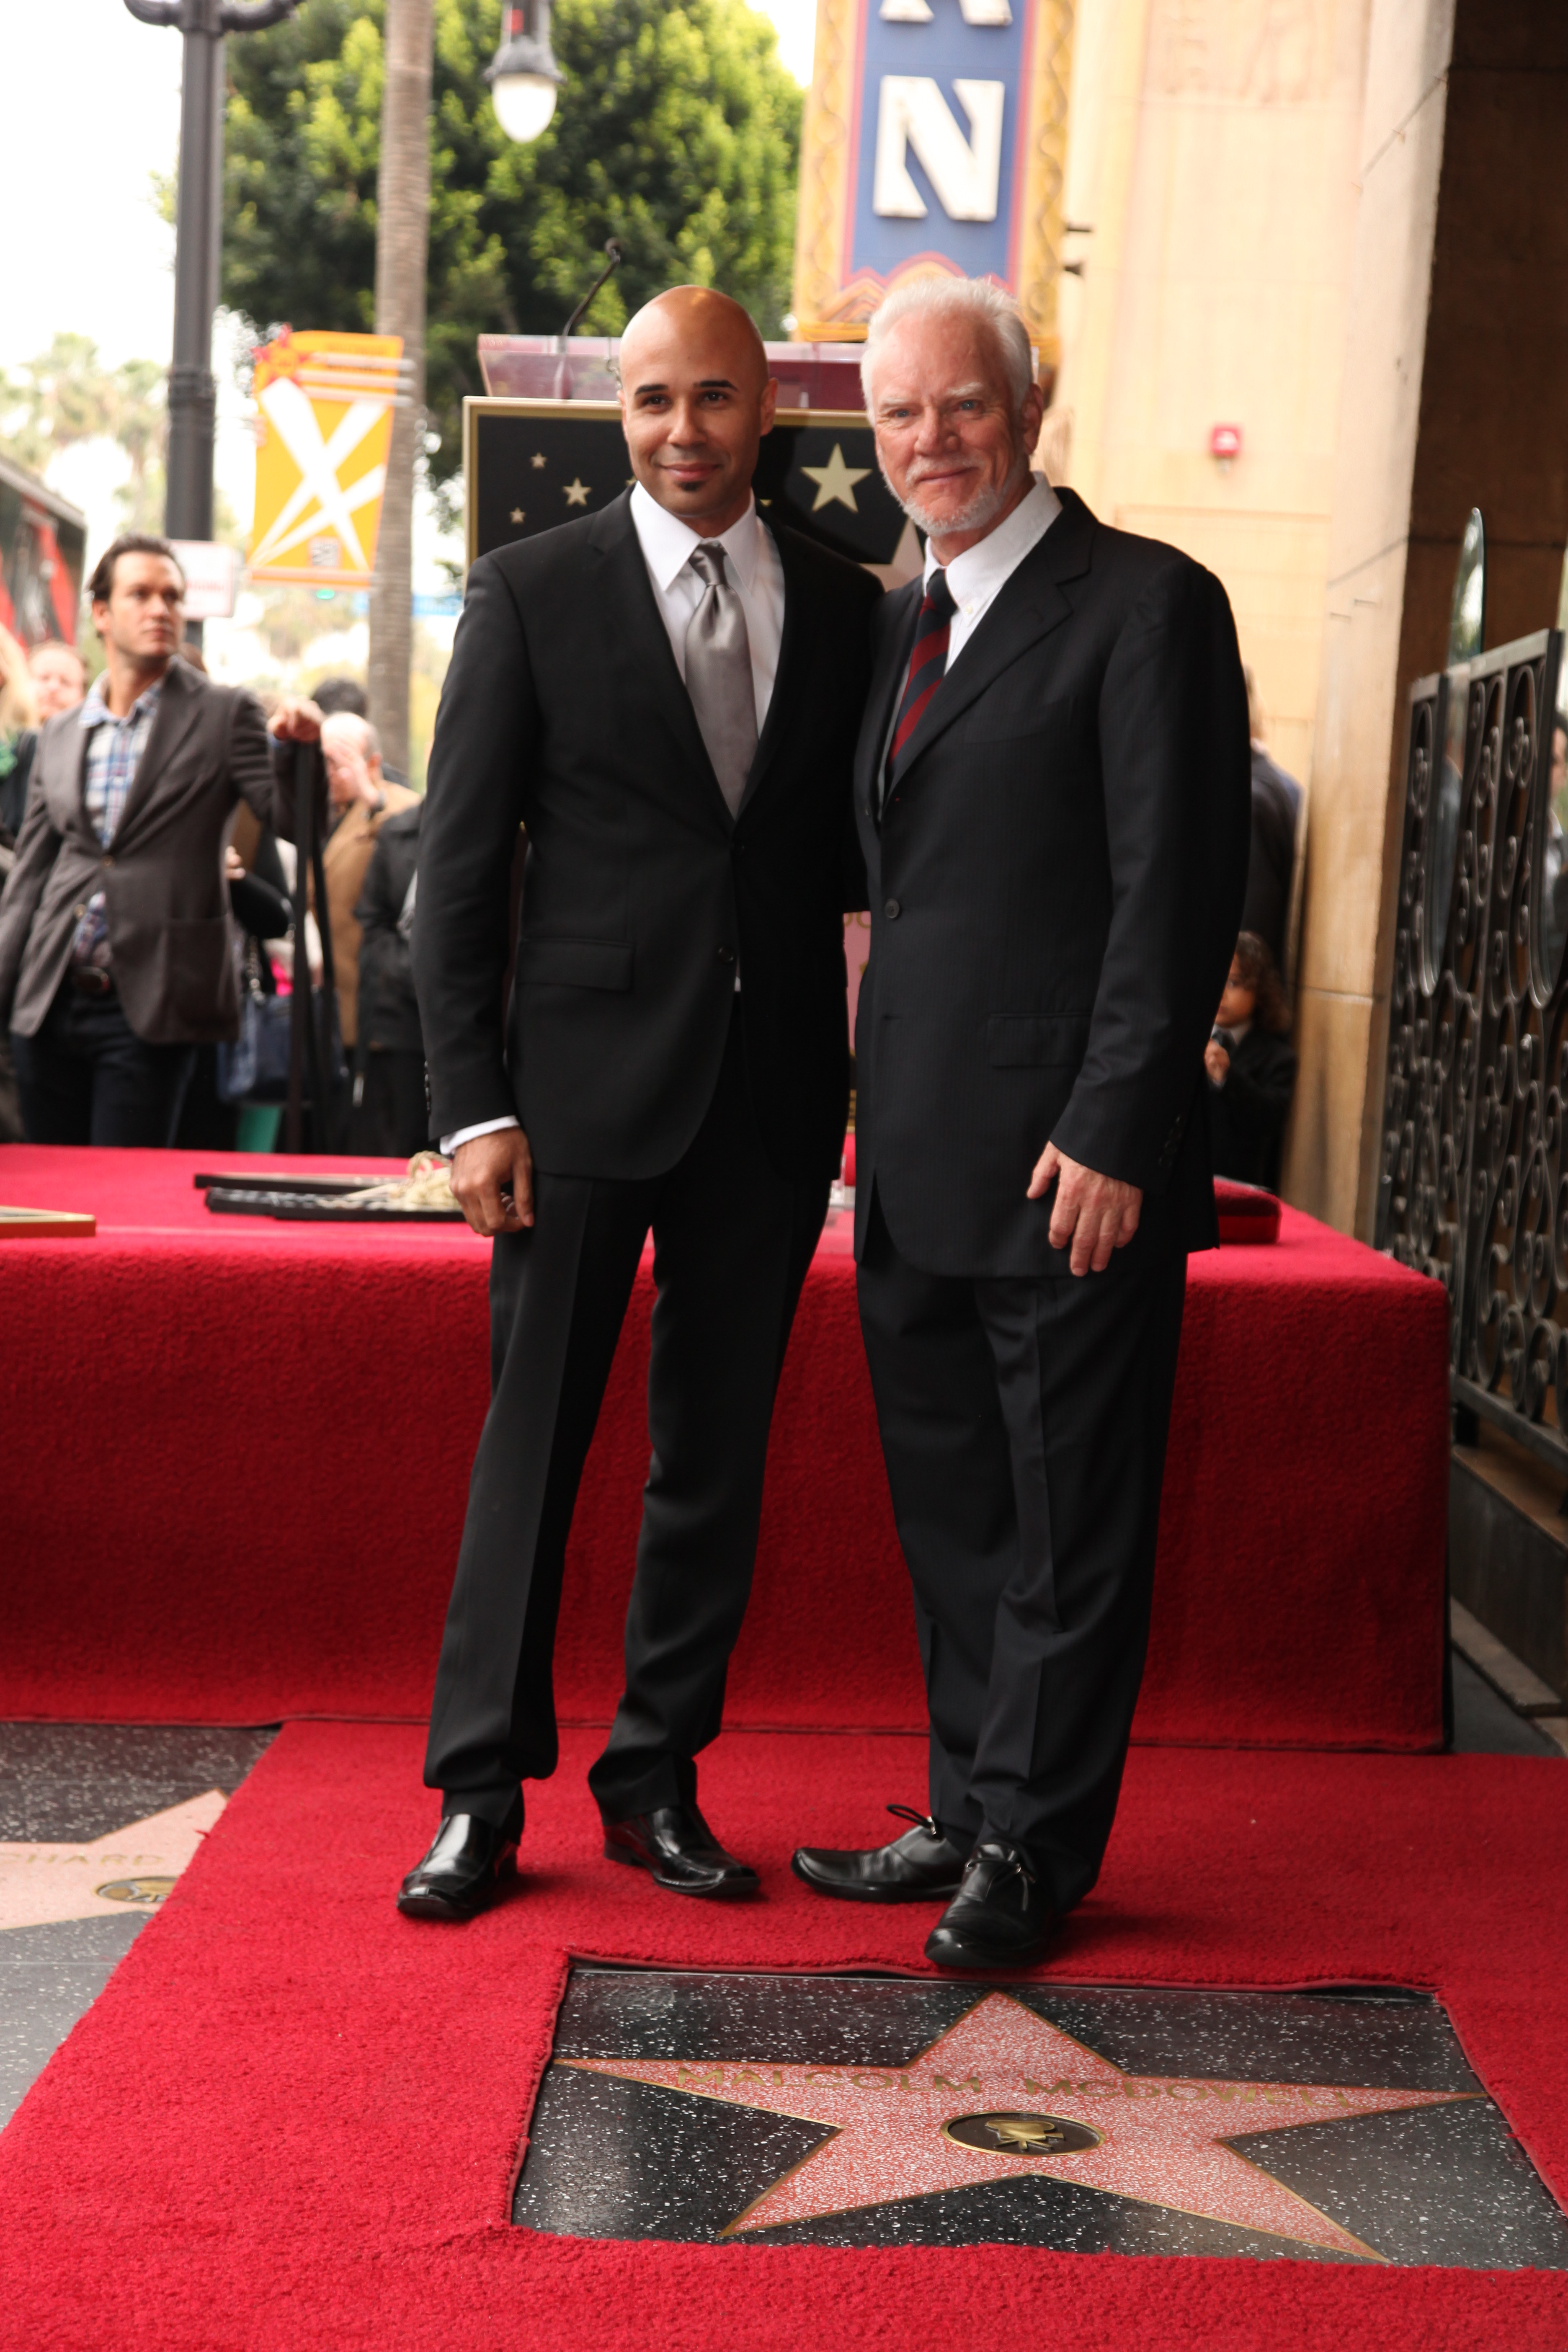 Manager/Producer Chris Roe with Actor Malcolm McDowell. Malcolm McDowell Honored With A Star On The Hollywood Walk Of Fame on March 16, 2012 in Hollywood, California.